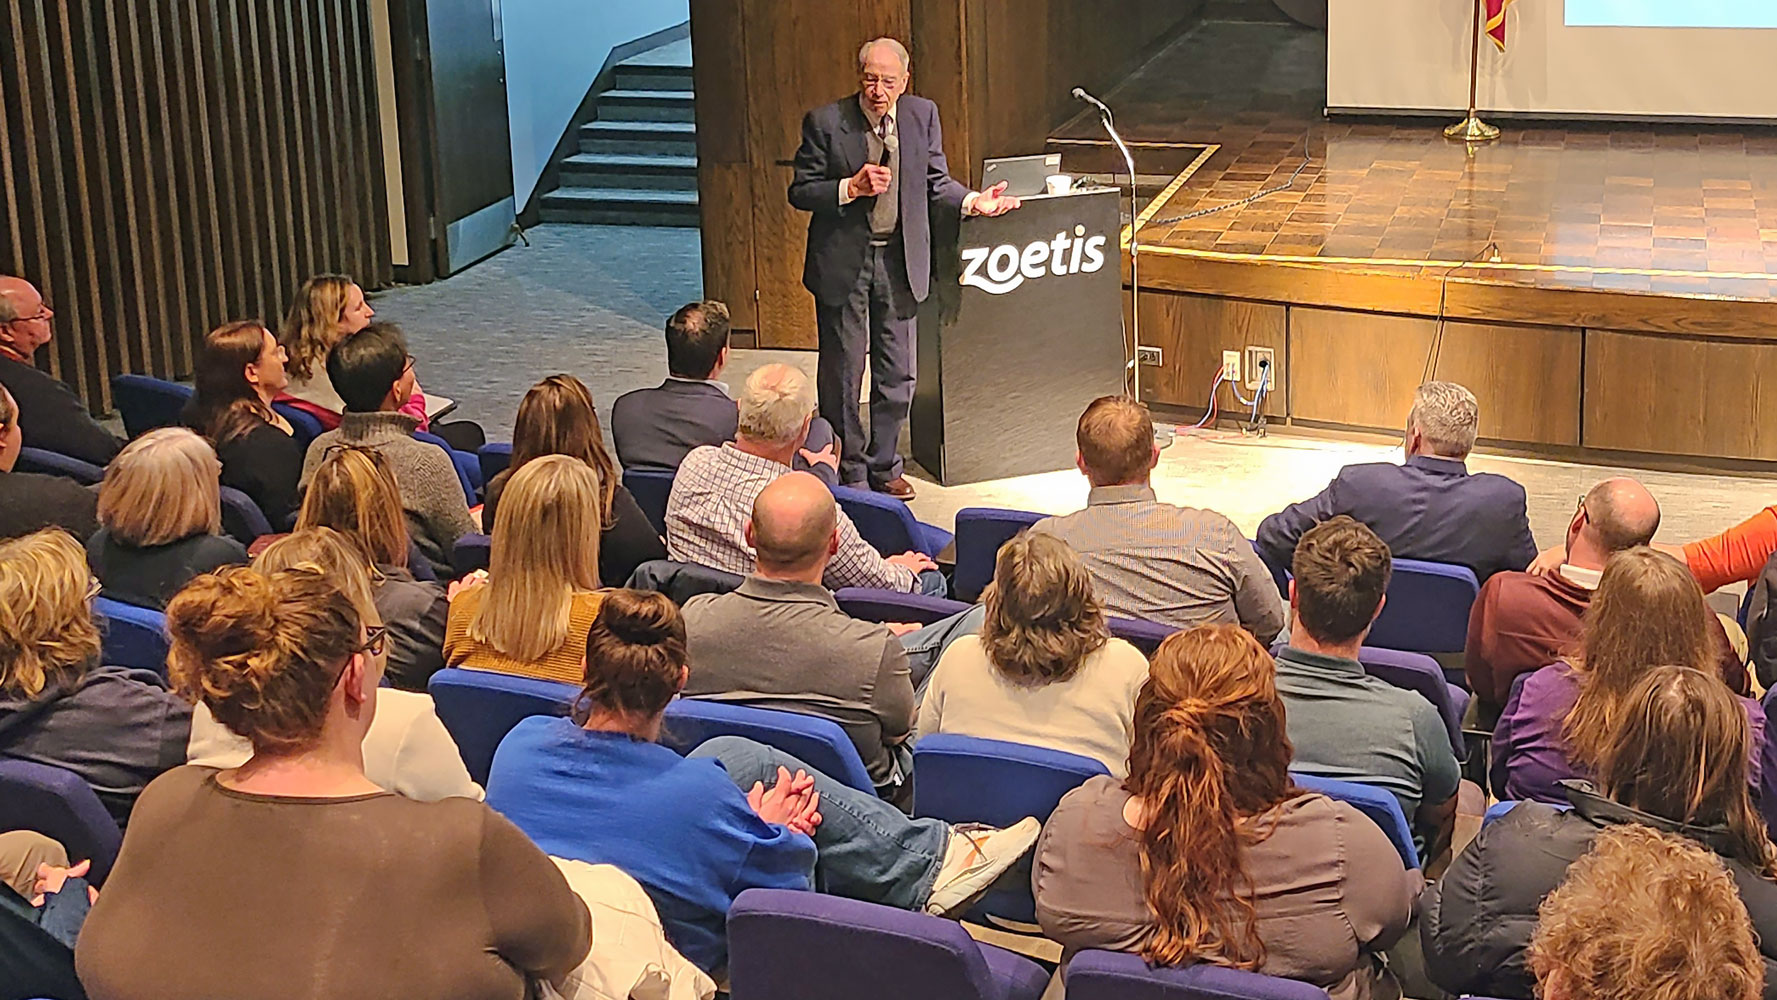 Grassley visits Zoetis in Charles City for employee Q-and-A